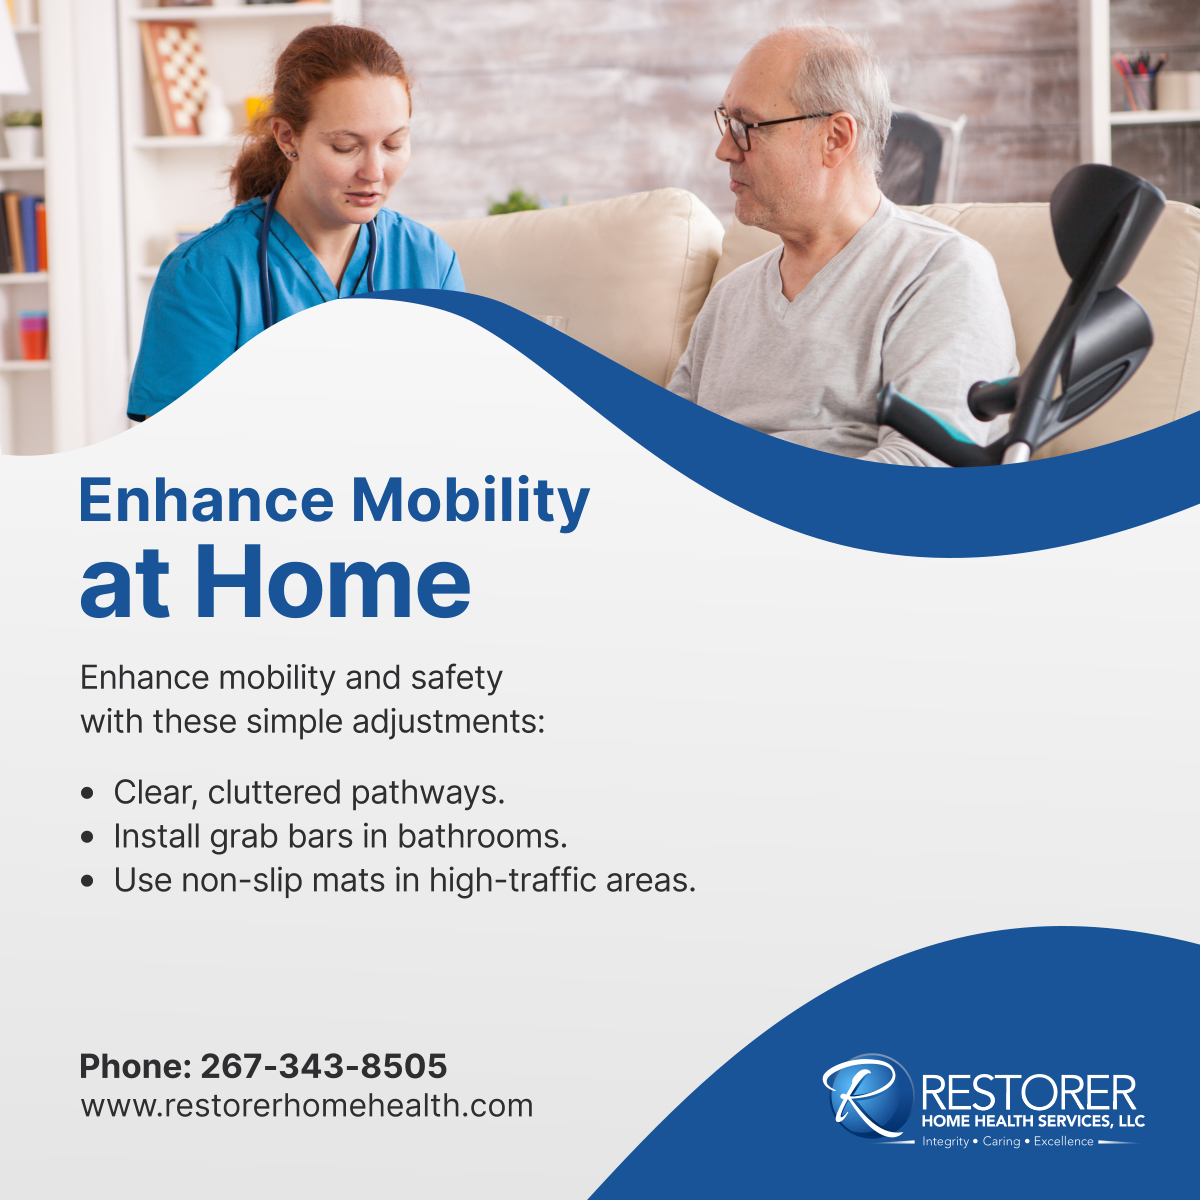 Improve accessibility and prevent falls at home with these easy modifications. Stay safe and mobile with these simple tips! 

#PhiladelphiaPA #HomeHealthcare #Mobility